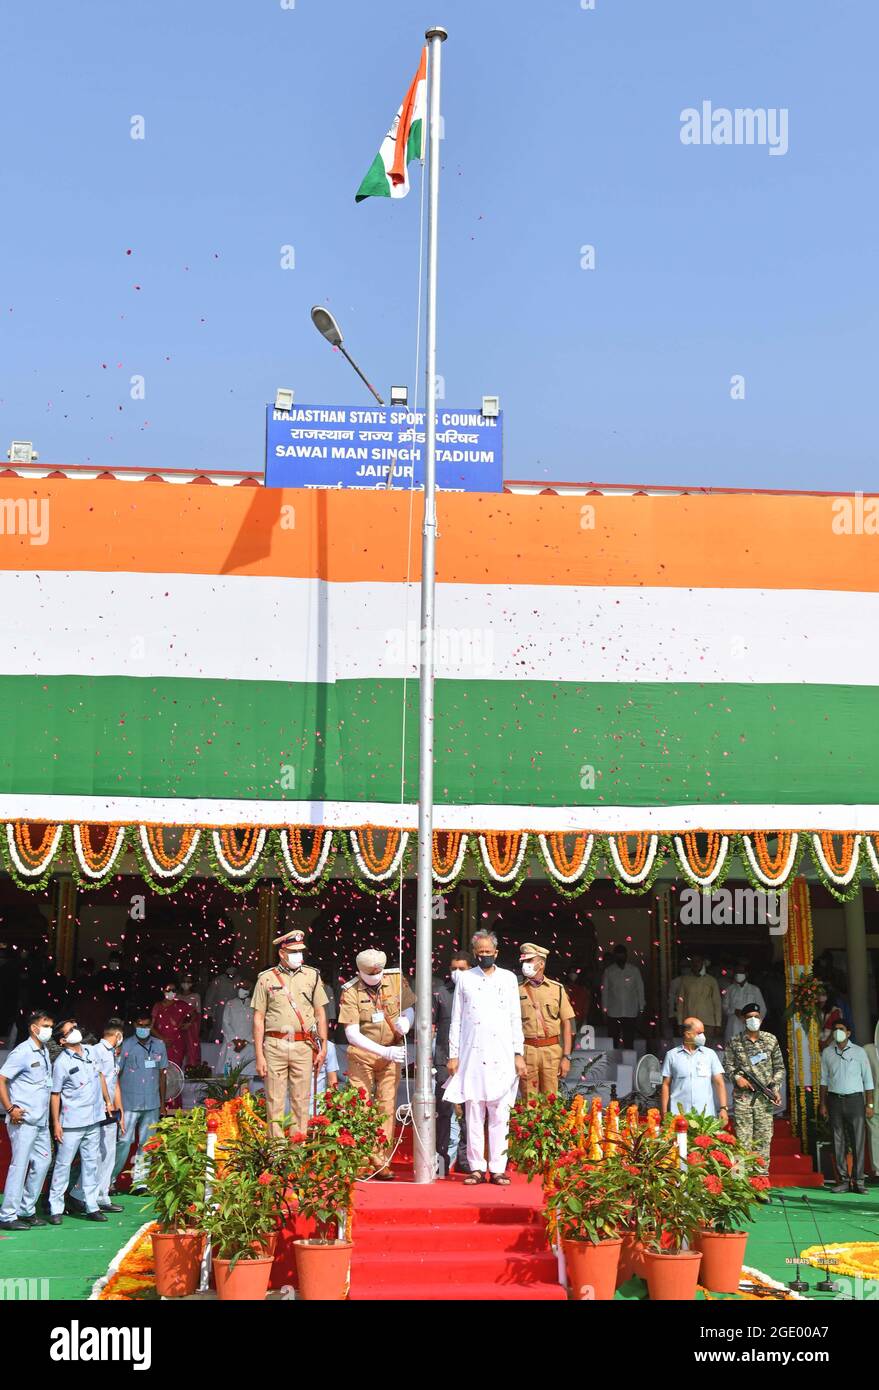 Jaipur, Rajasthan, India, August 15, 2021: Rajasthan Chief Minister Ashok Gehlot stands for the national anthem after hoisting the Indian National flag Tricolor during the 75th Independence Day celebrations at Sawai Mansingh Stadium in Jaipur. Credit: Sumit Saraswat/Alamy Live News Stock Photo